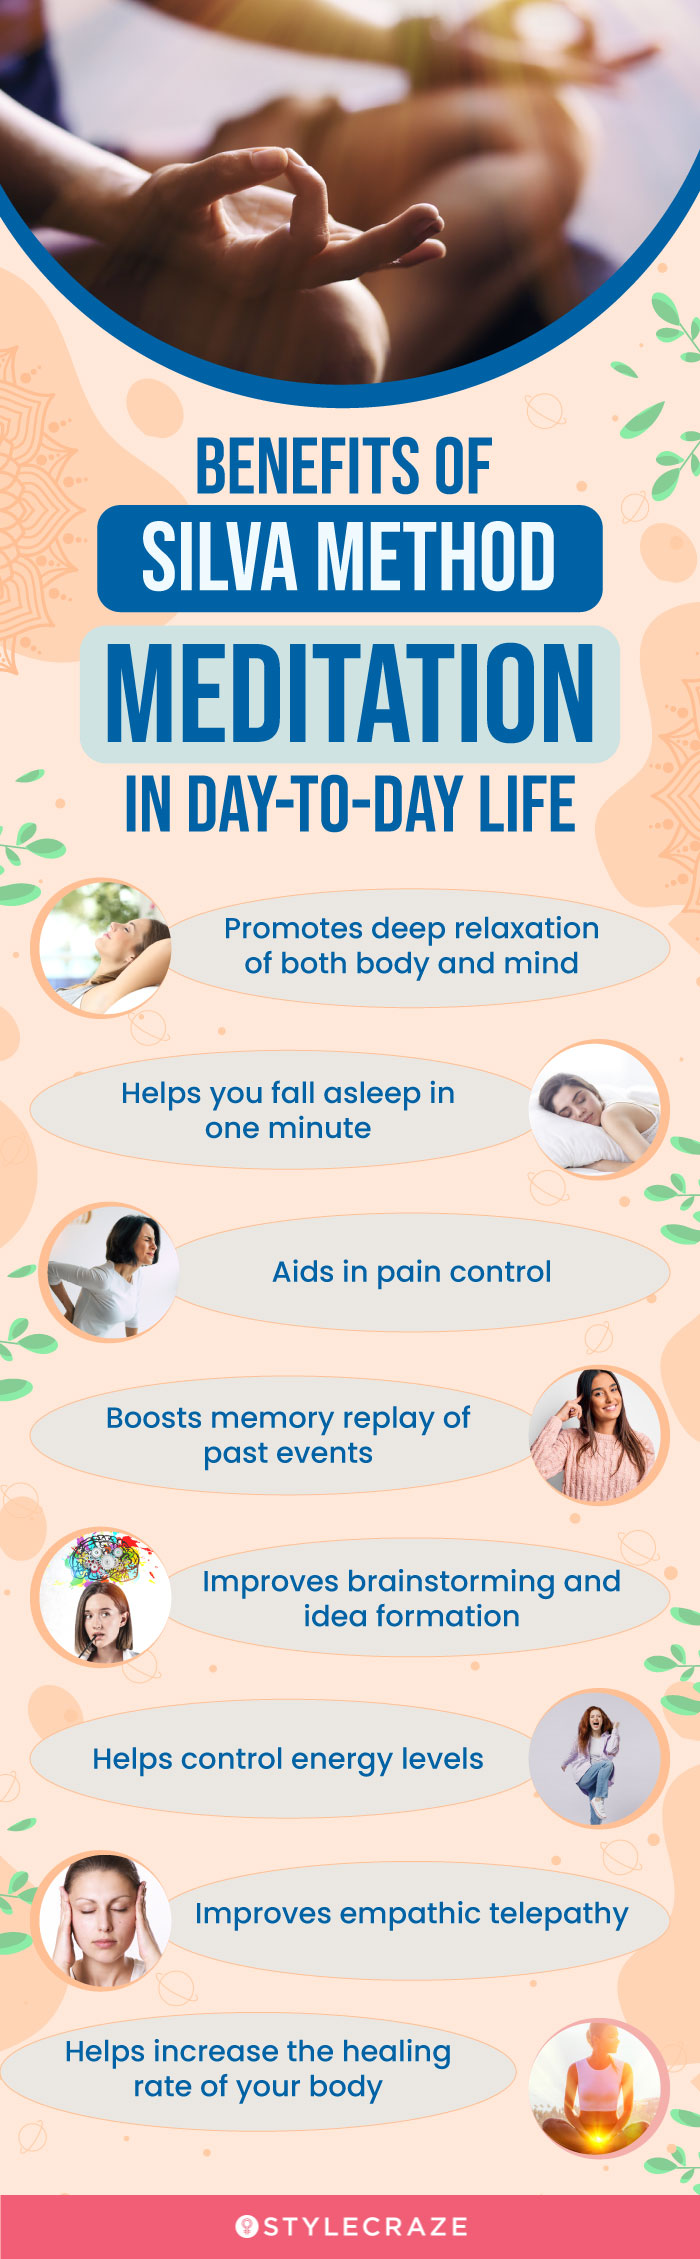 benefits of silva method meditation in day to day life (infographic)